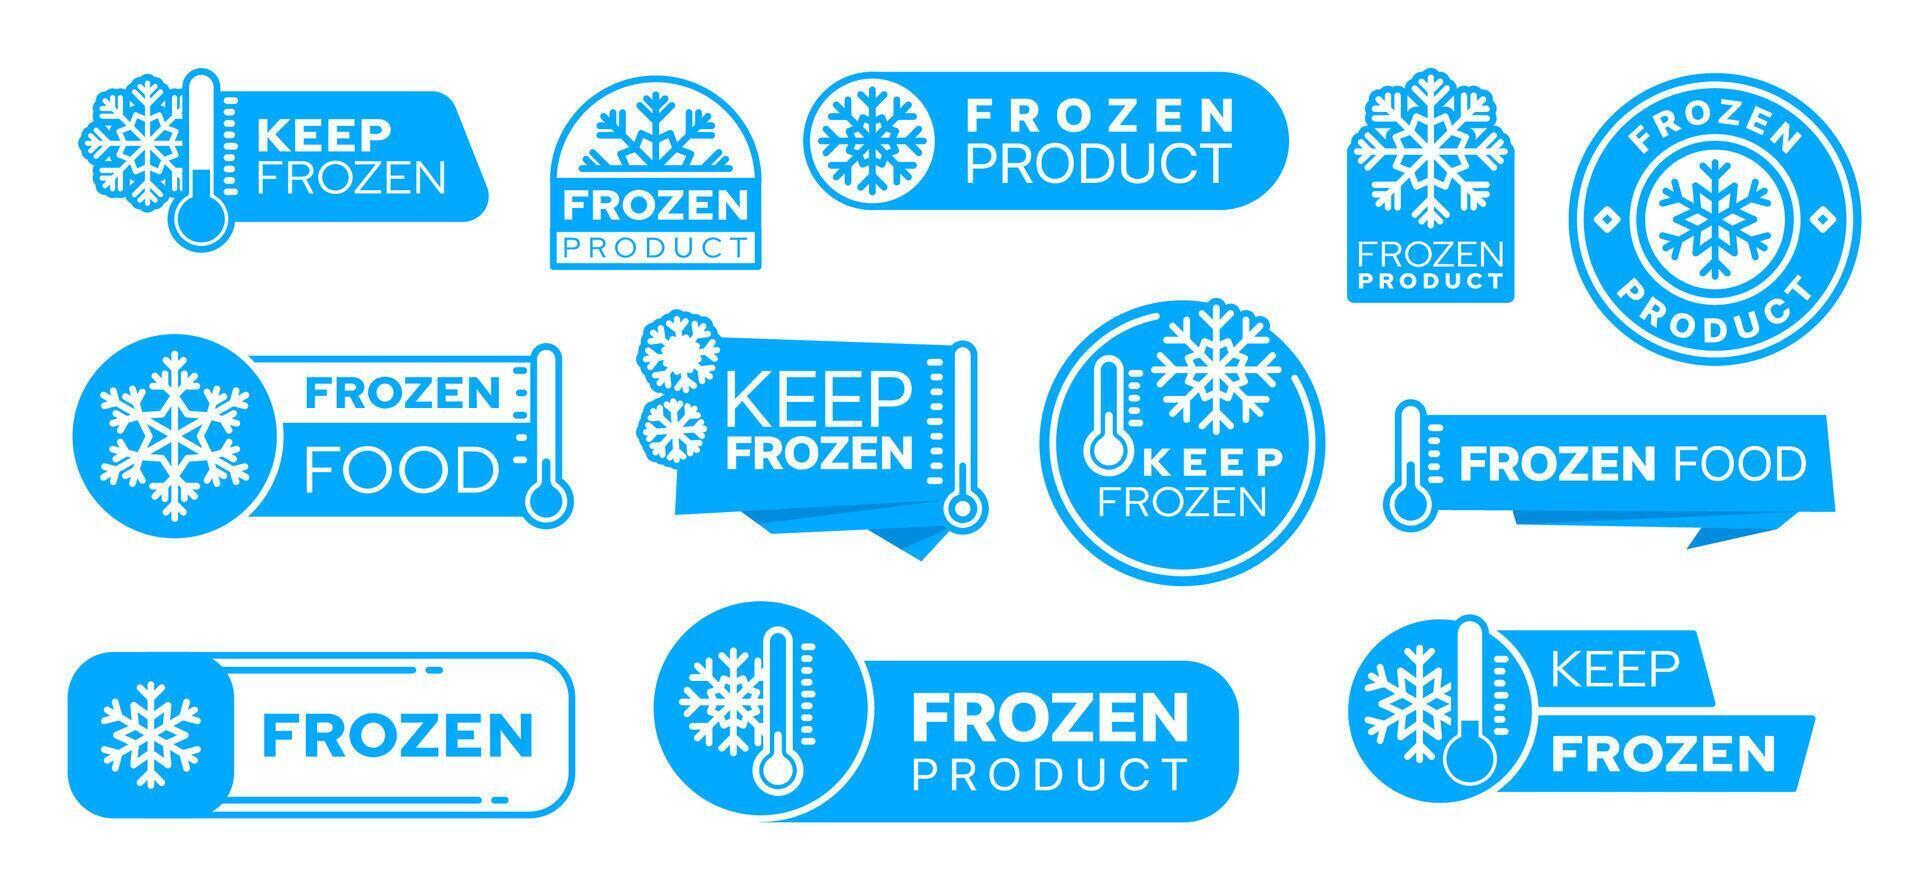 Blue frozen cold product icons, labels and badges vector